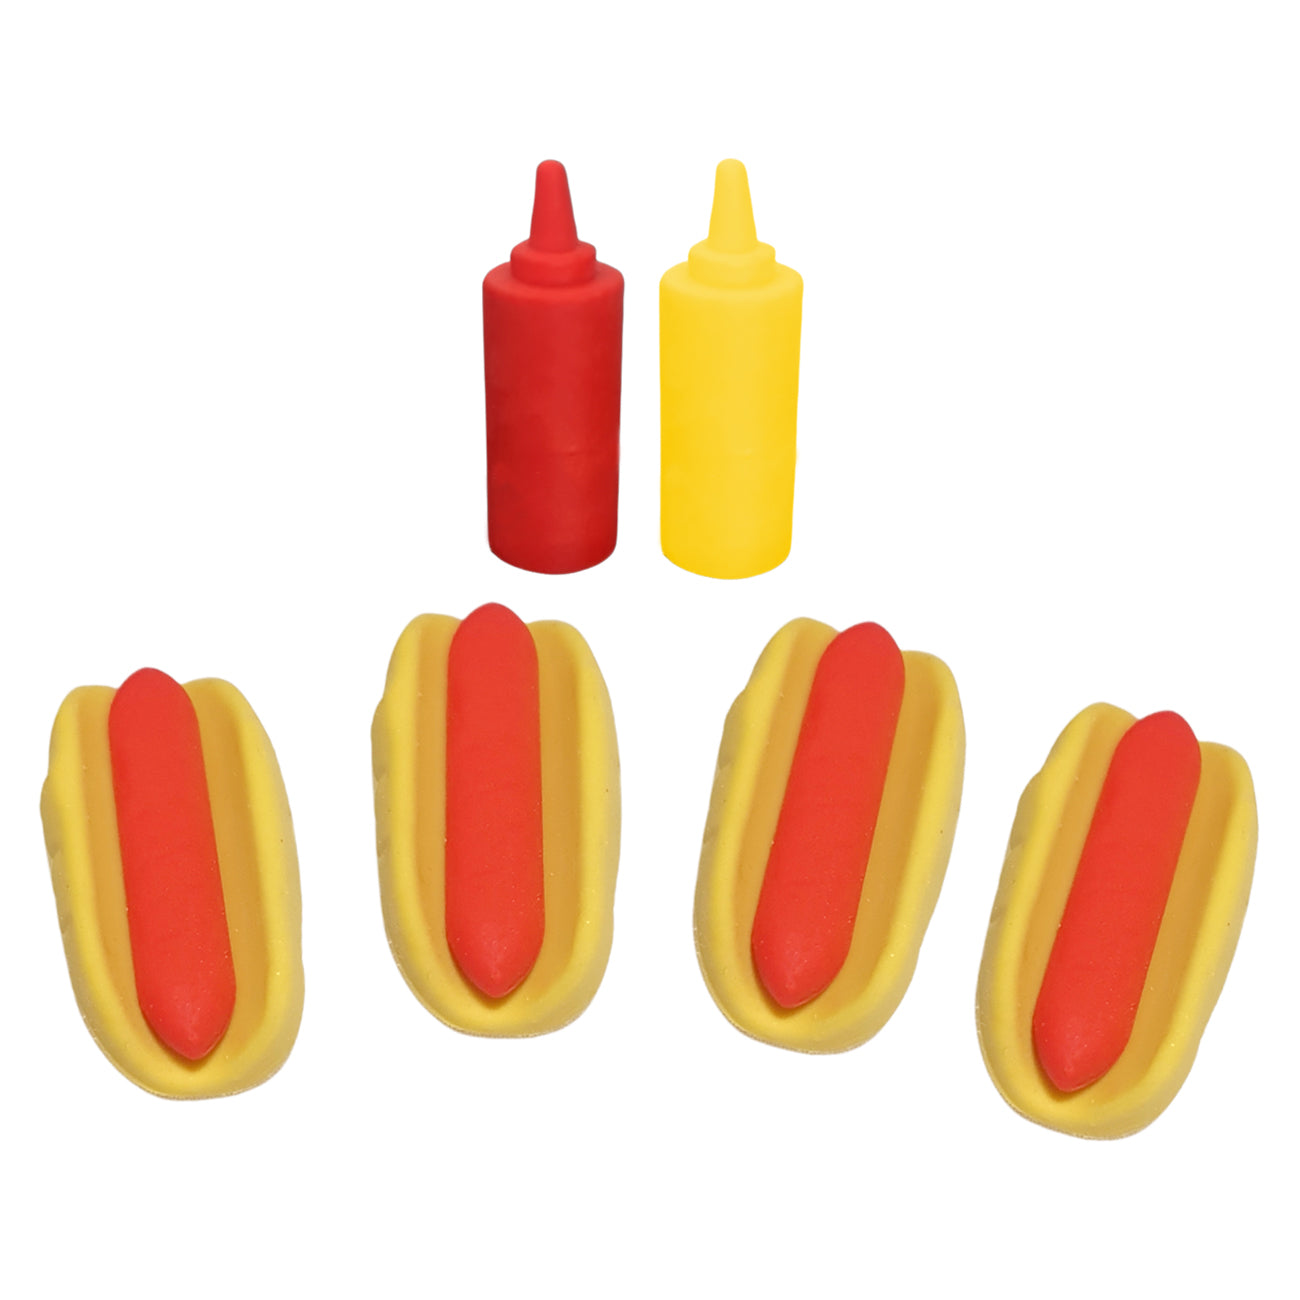 Hot dog elf props with miniature sausages and a ketchup and mustard sauces